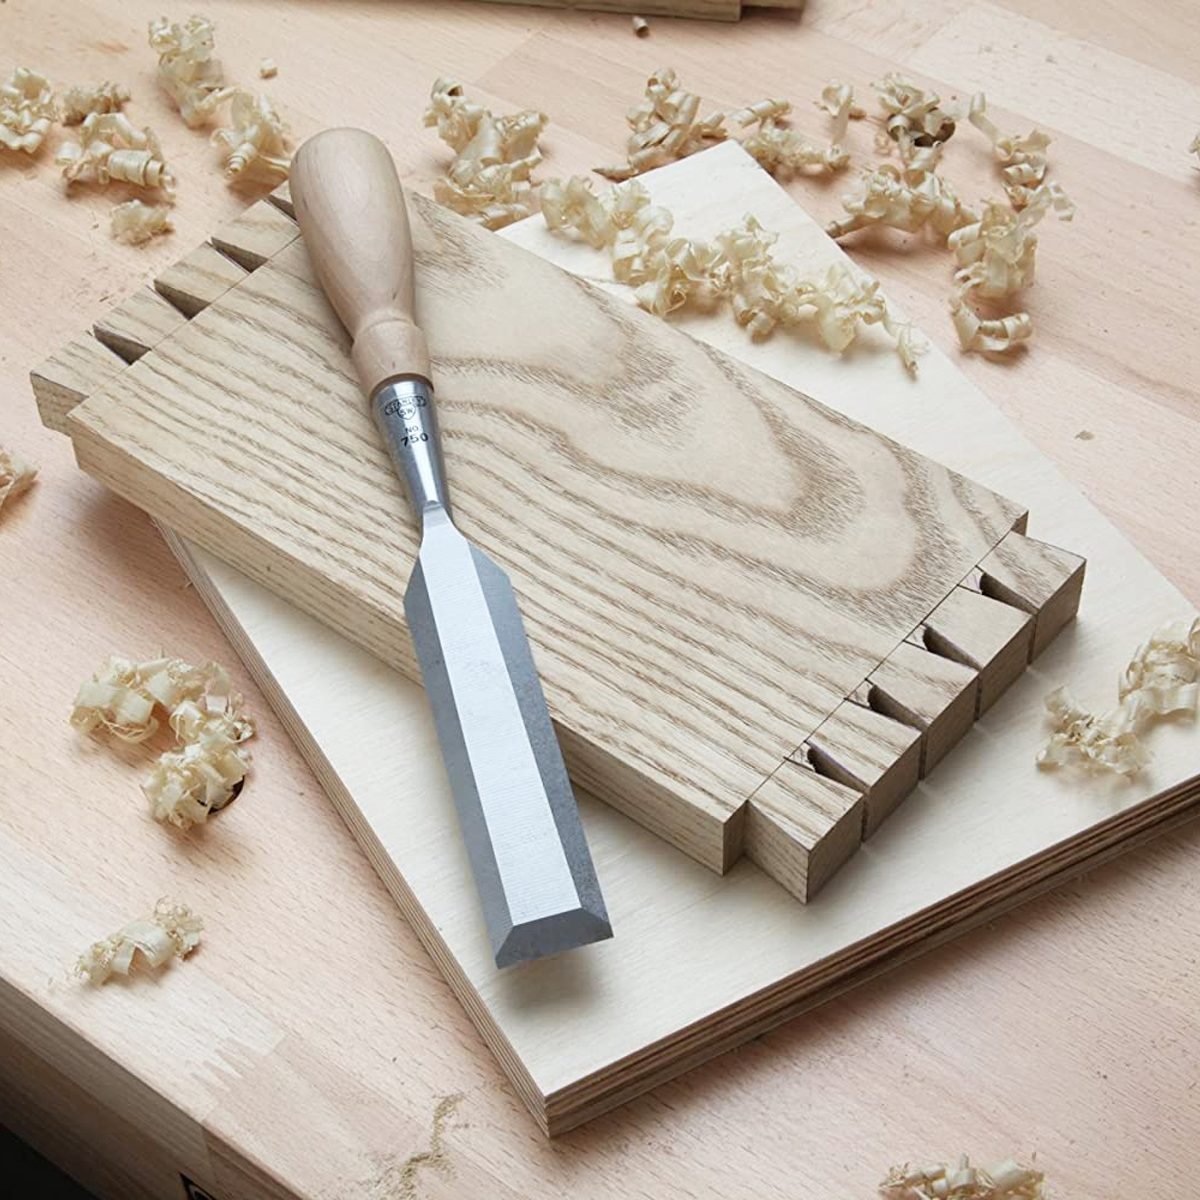 15 Best Gifts for Woodworkers, According to an Expert Woodworker